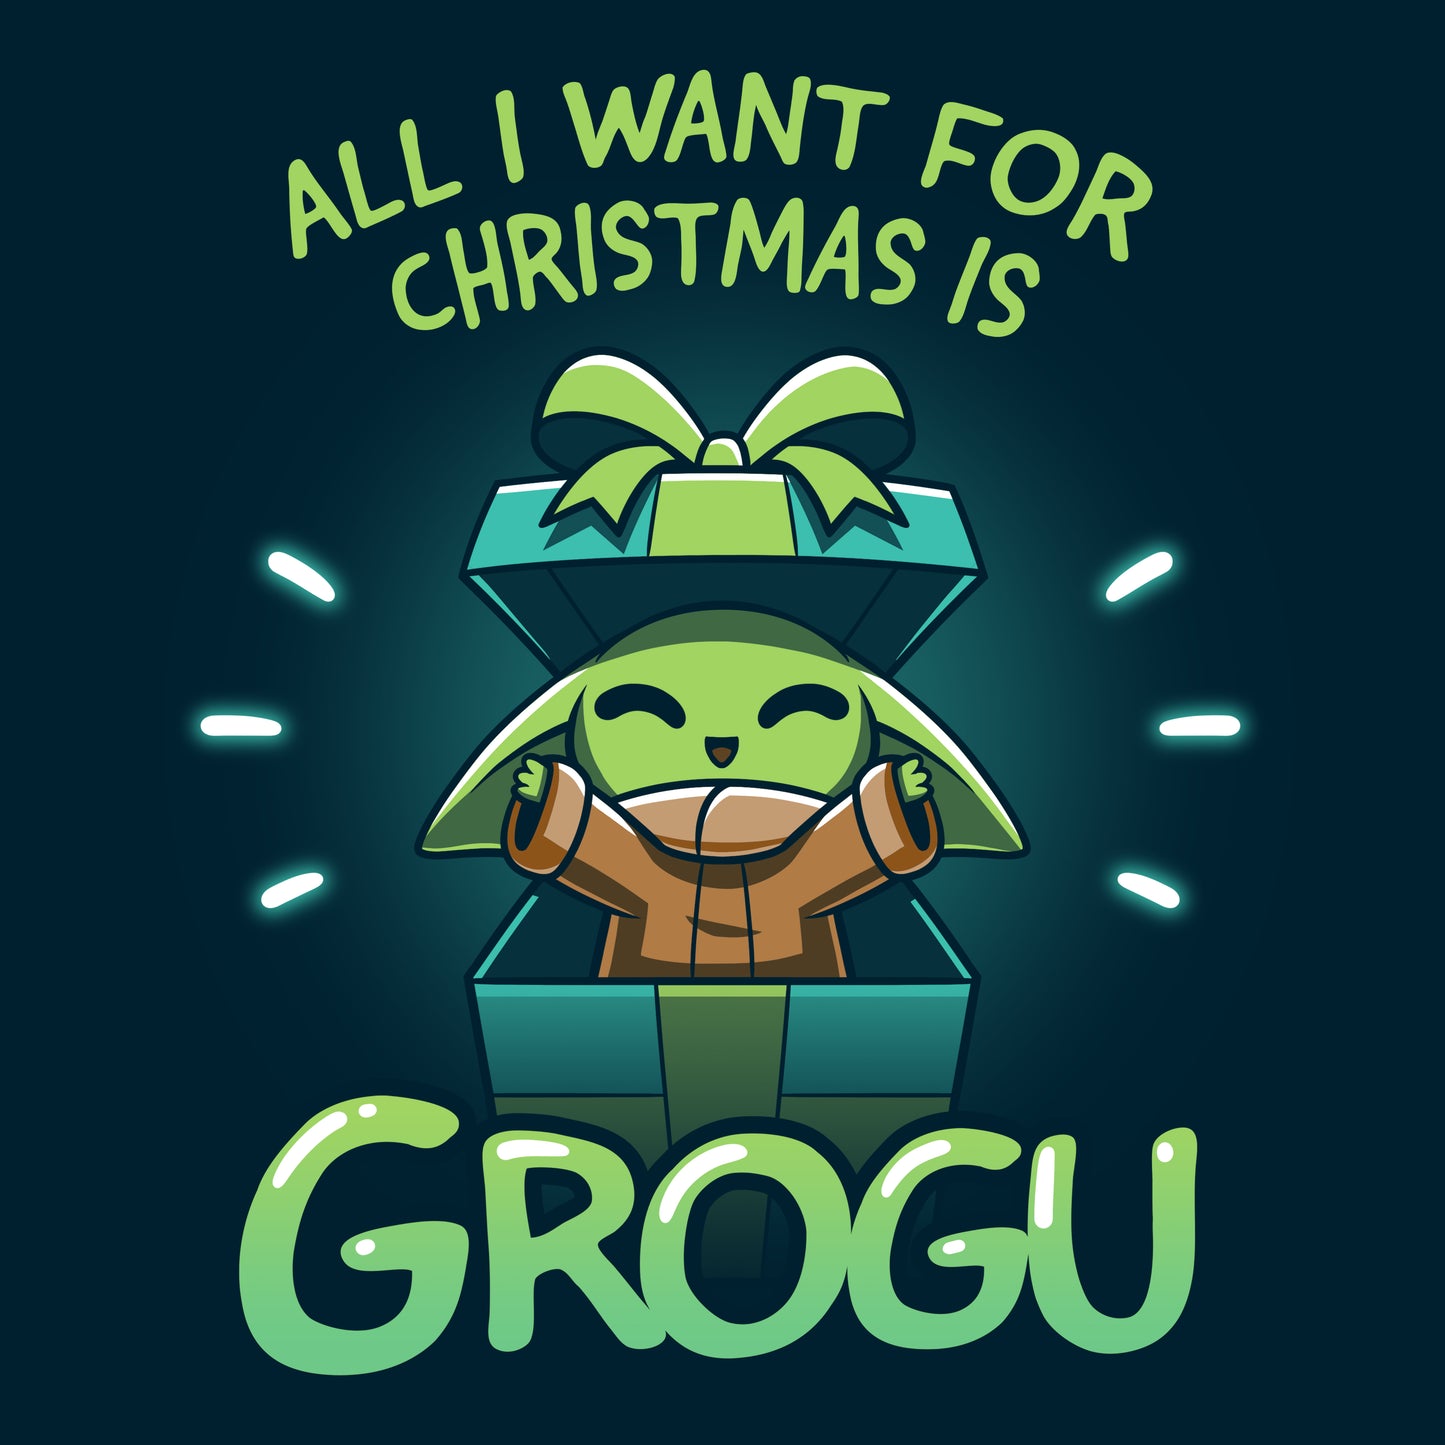 Get into the holiday spirit with this officially licensed Star Wars All I Want For Christmas Is Grogu T-shirt.